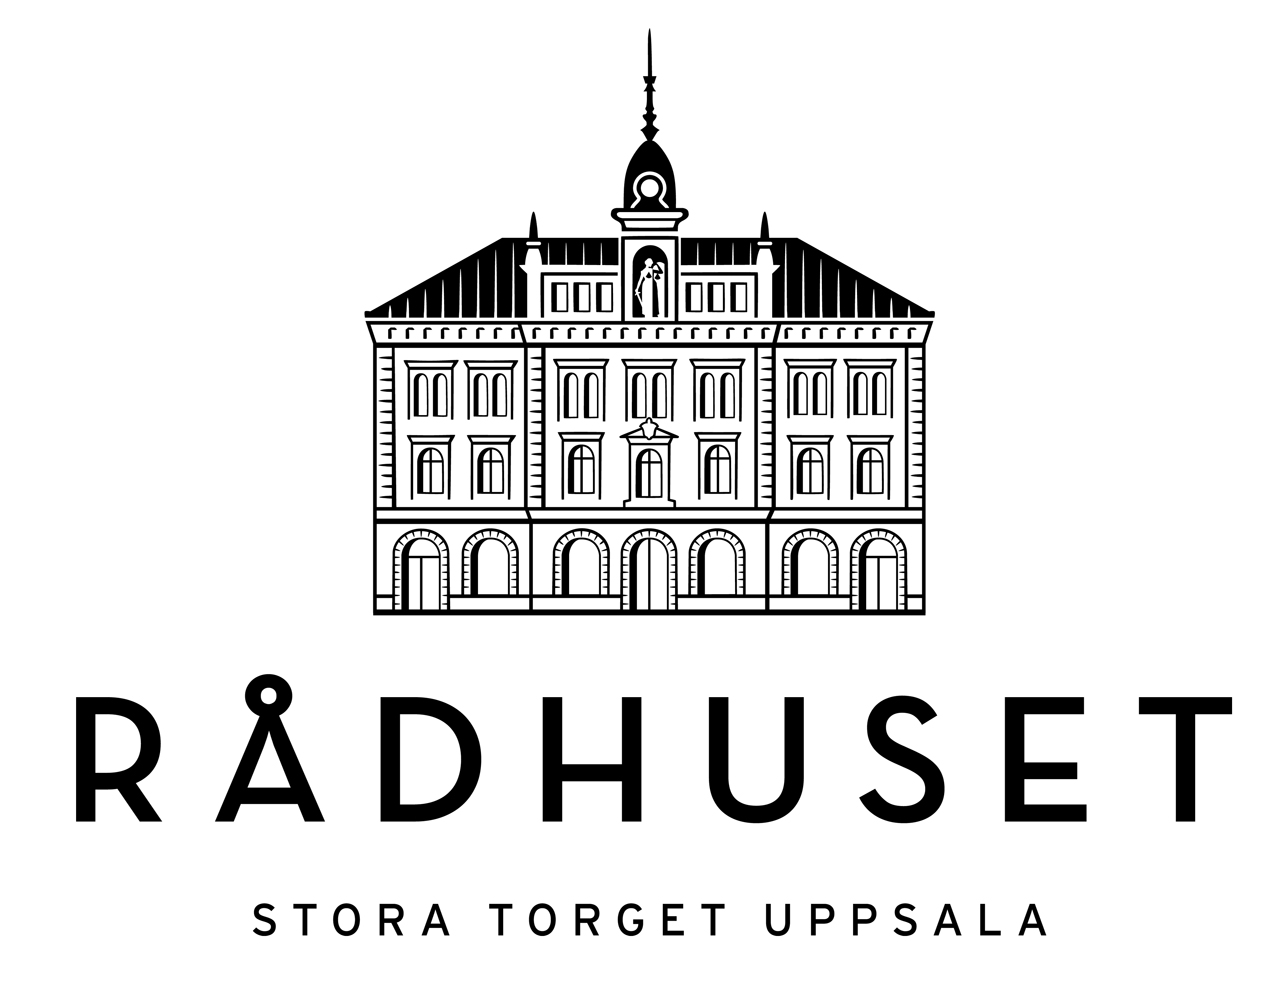 Illustration for a logo the townhall in Uppsala